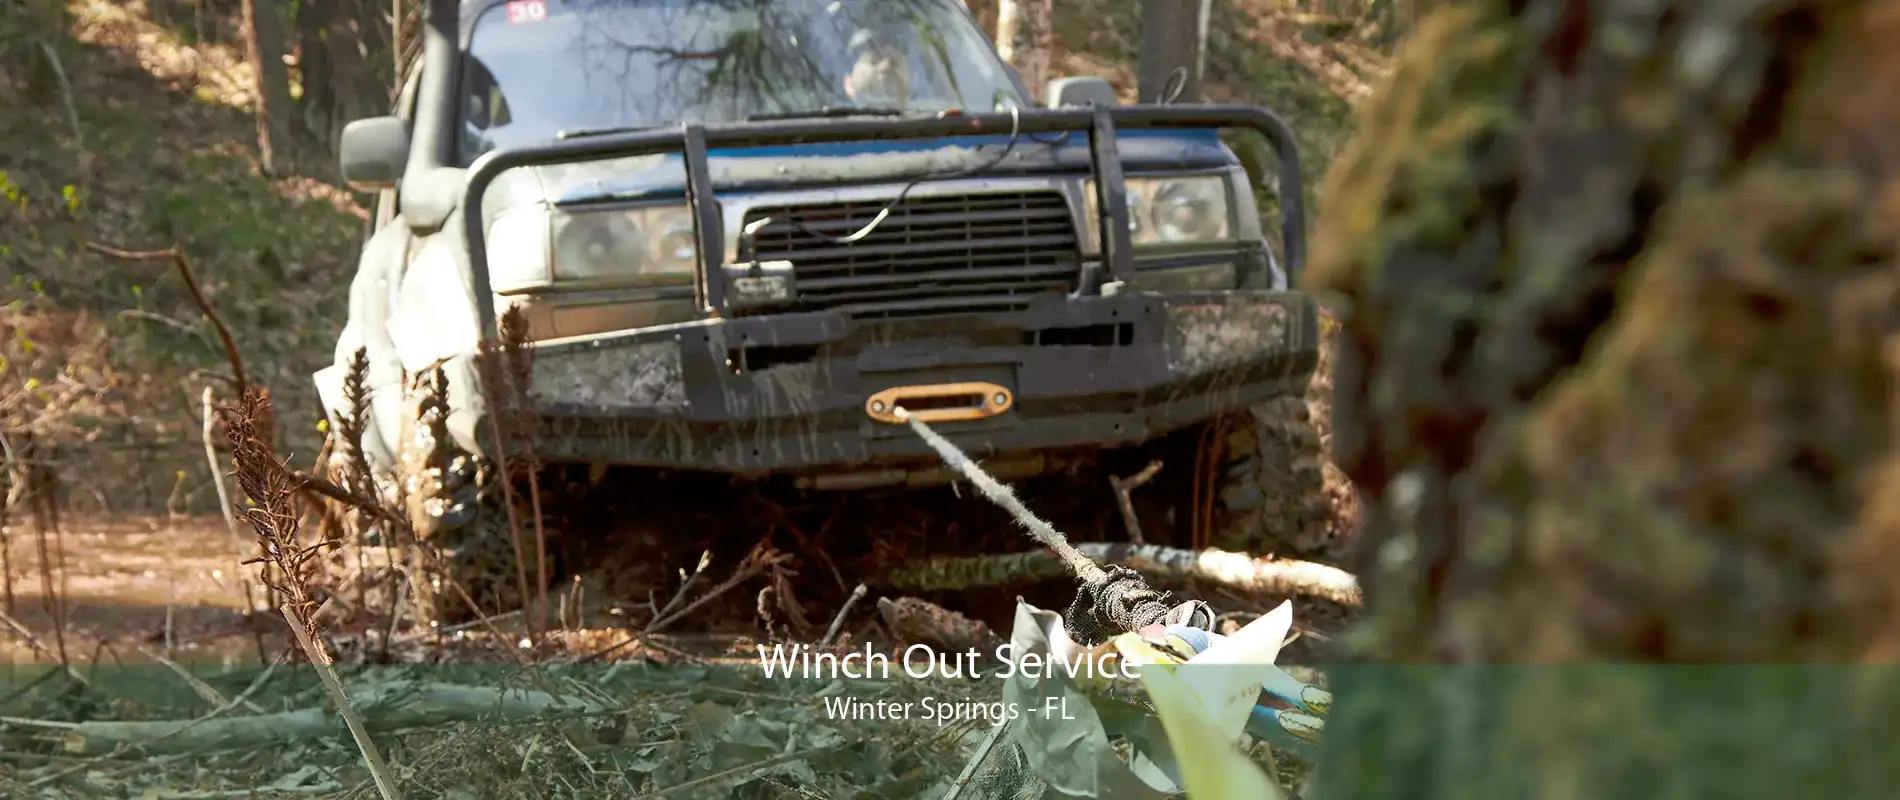 Winch Out Service Winter Springs - FL